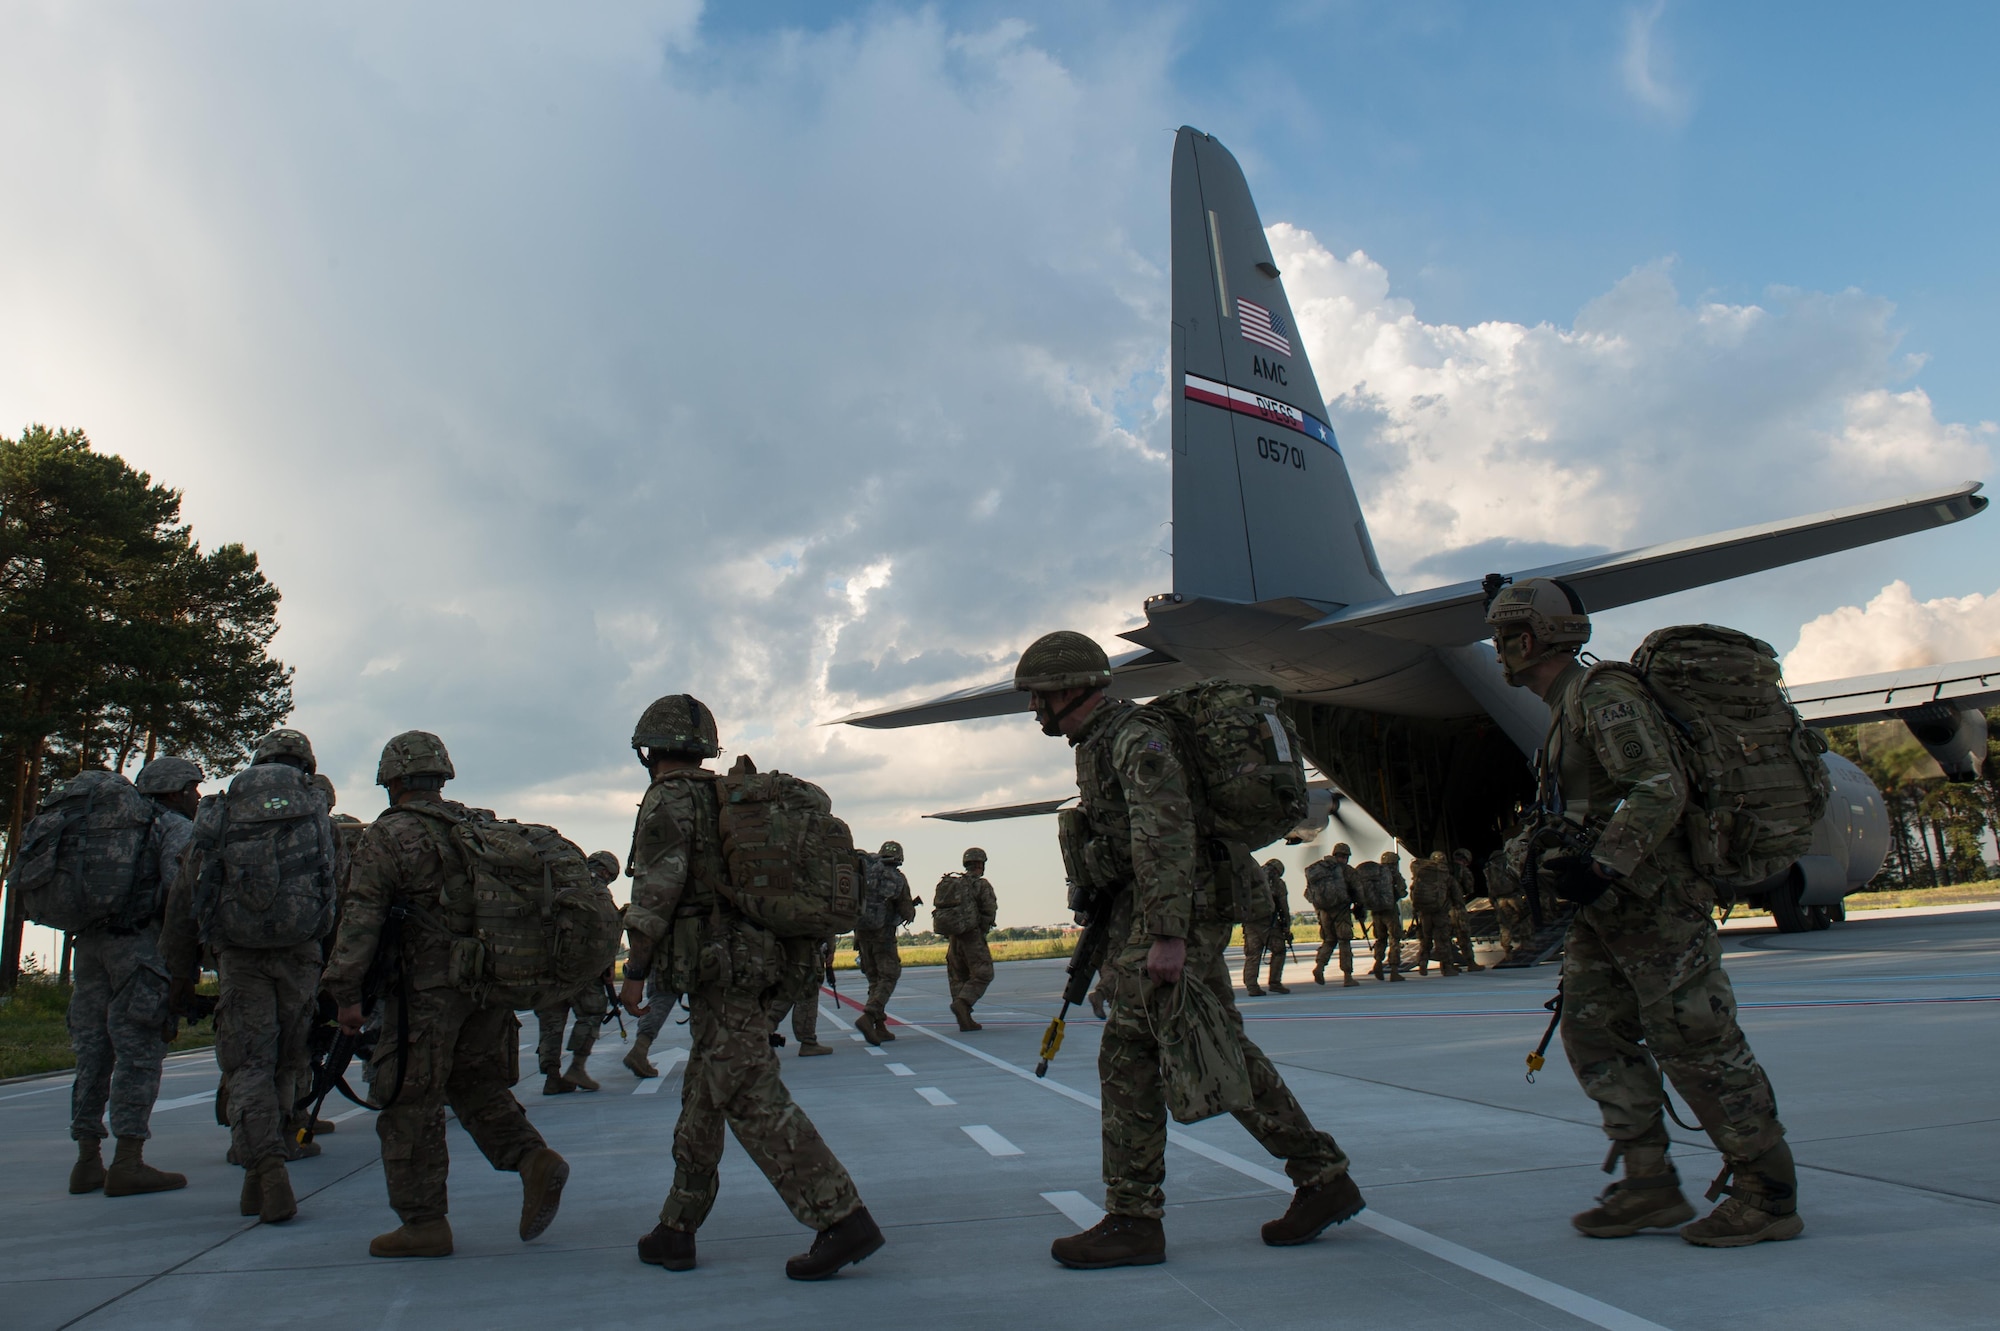 U.S. Soldiers assigned to the 82nd Airborne Division board a C-130J Super Hercules during Exercise Swift Response 16 at the Bydgoszcz Airport, Poland, June 8, 2016. Exercise SR16 is one of the premier military crisis response training events for multinational airborne forces in the world, the exercise has more than 5,000 participants from 10 NATO nations. (U.S. Air Force photo by Master Sgt. Joseph Swafford/Released)